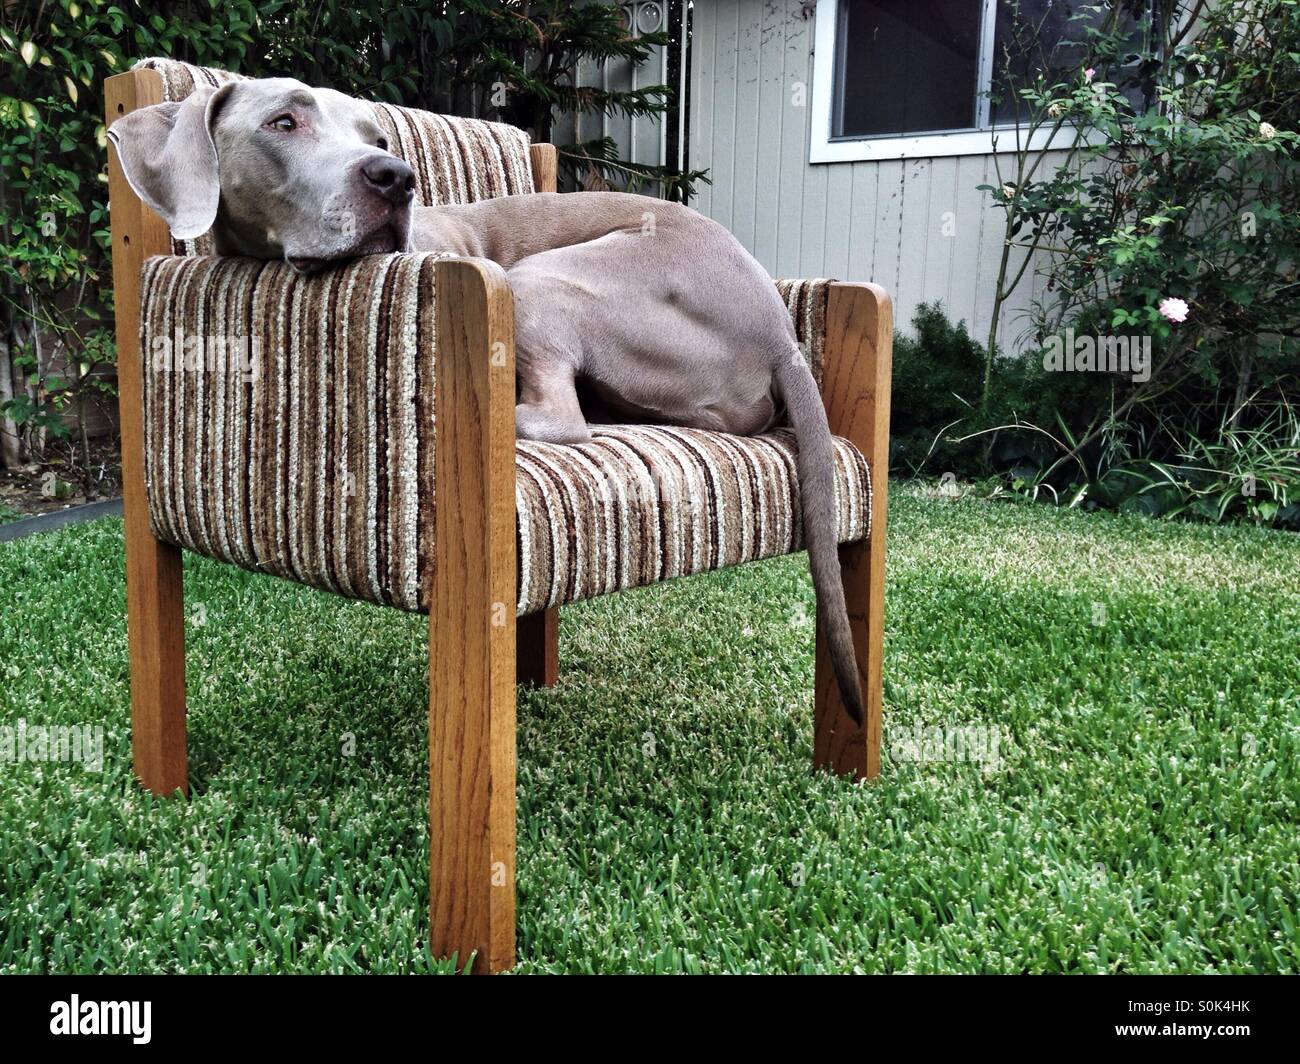 Weimaraner dog lounging in striped indoor chair in backyard grass Stock Photo